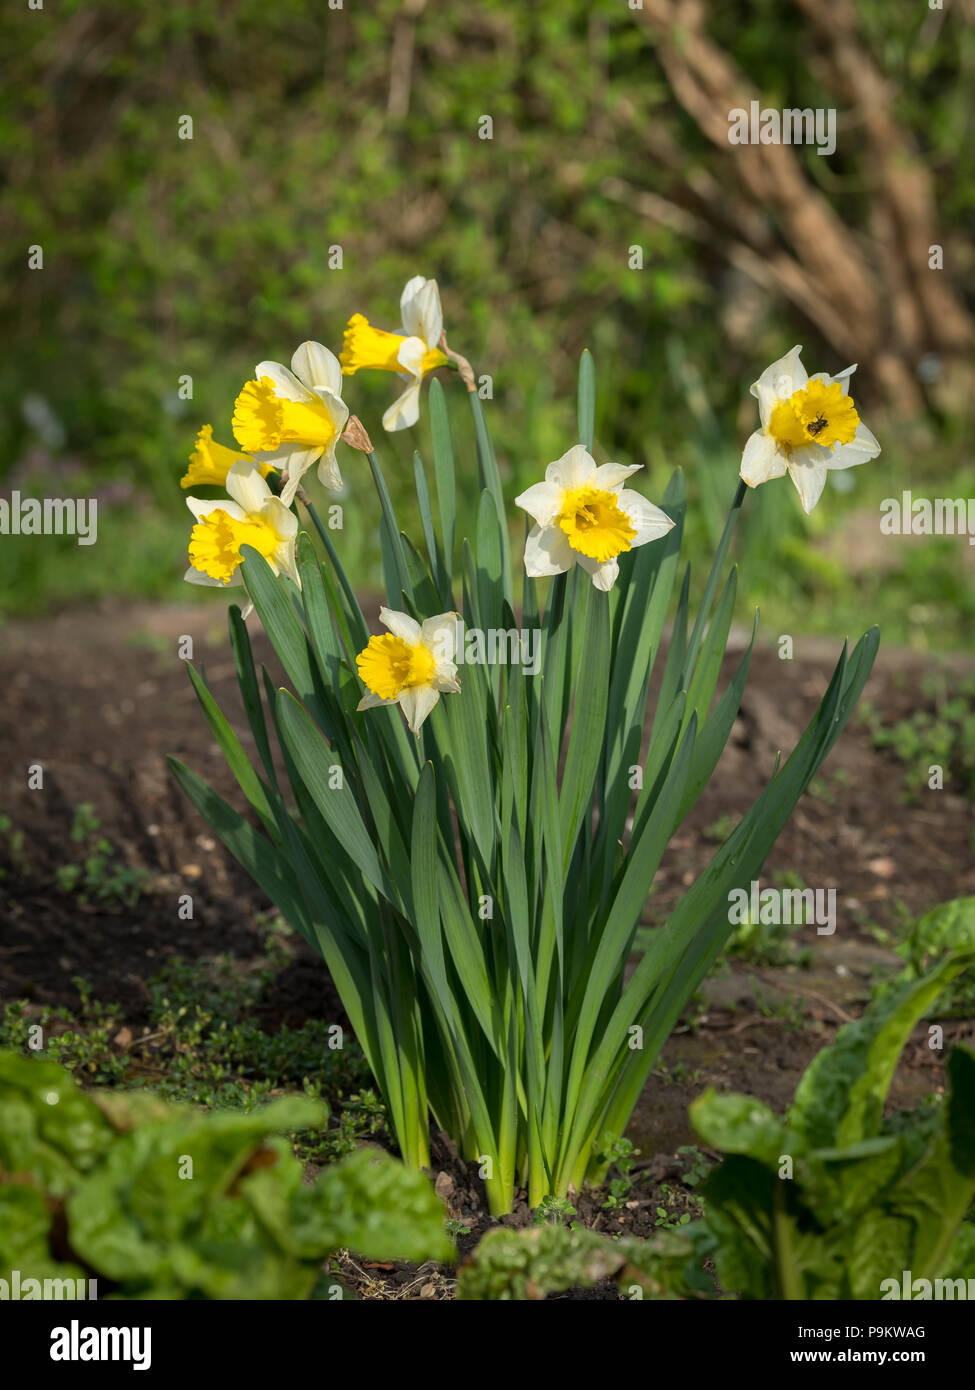 Closeup of a group of daffodils (Narcissus pseudonarcissus) on a sunny day in spring Stock Photo